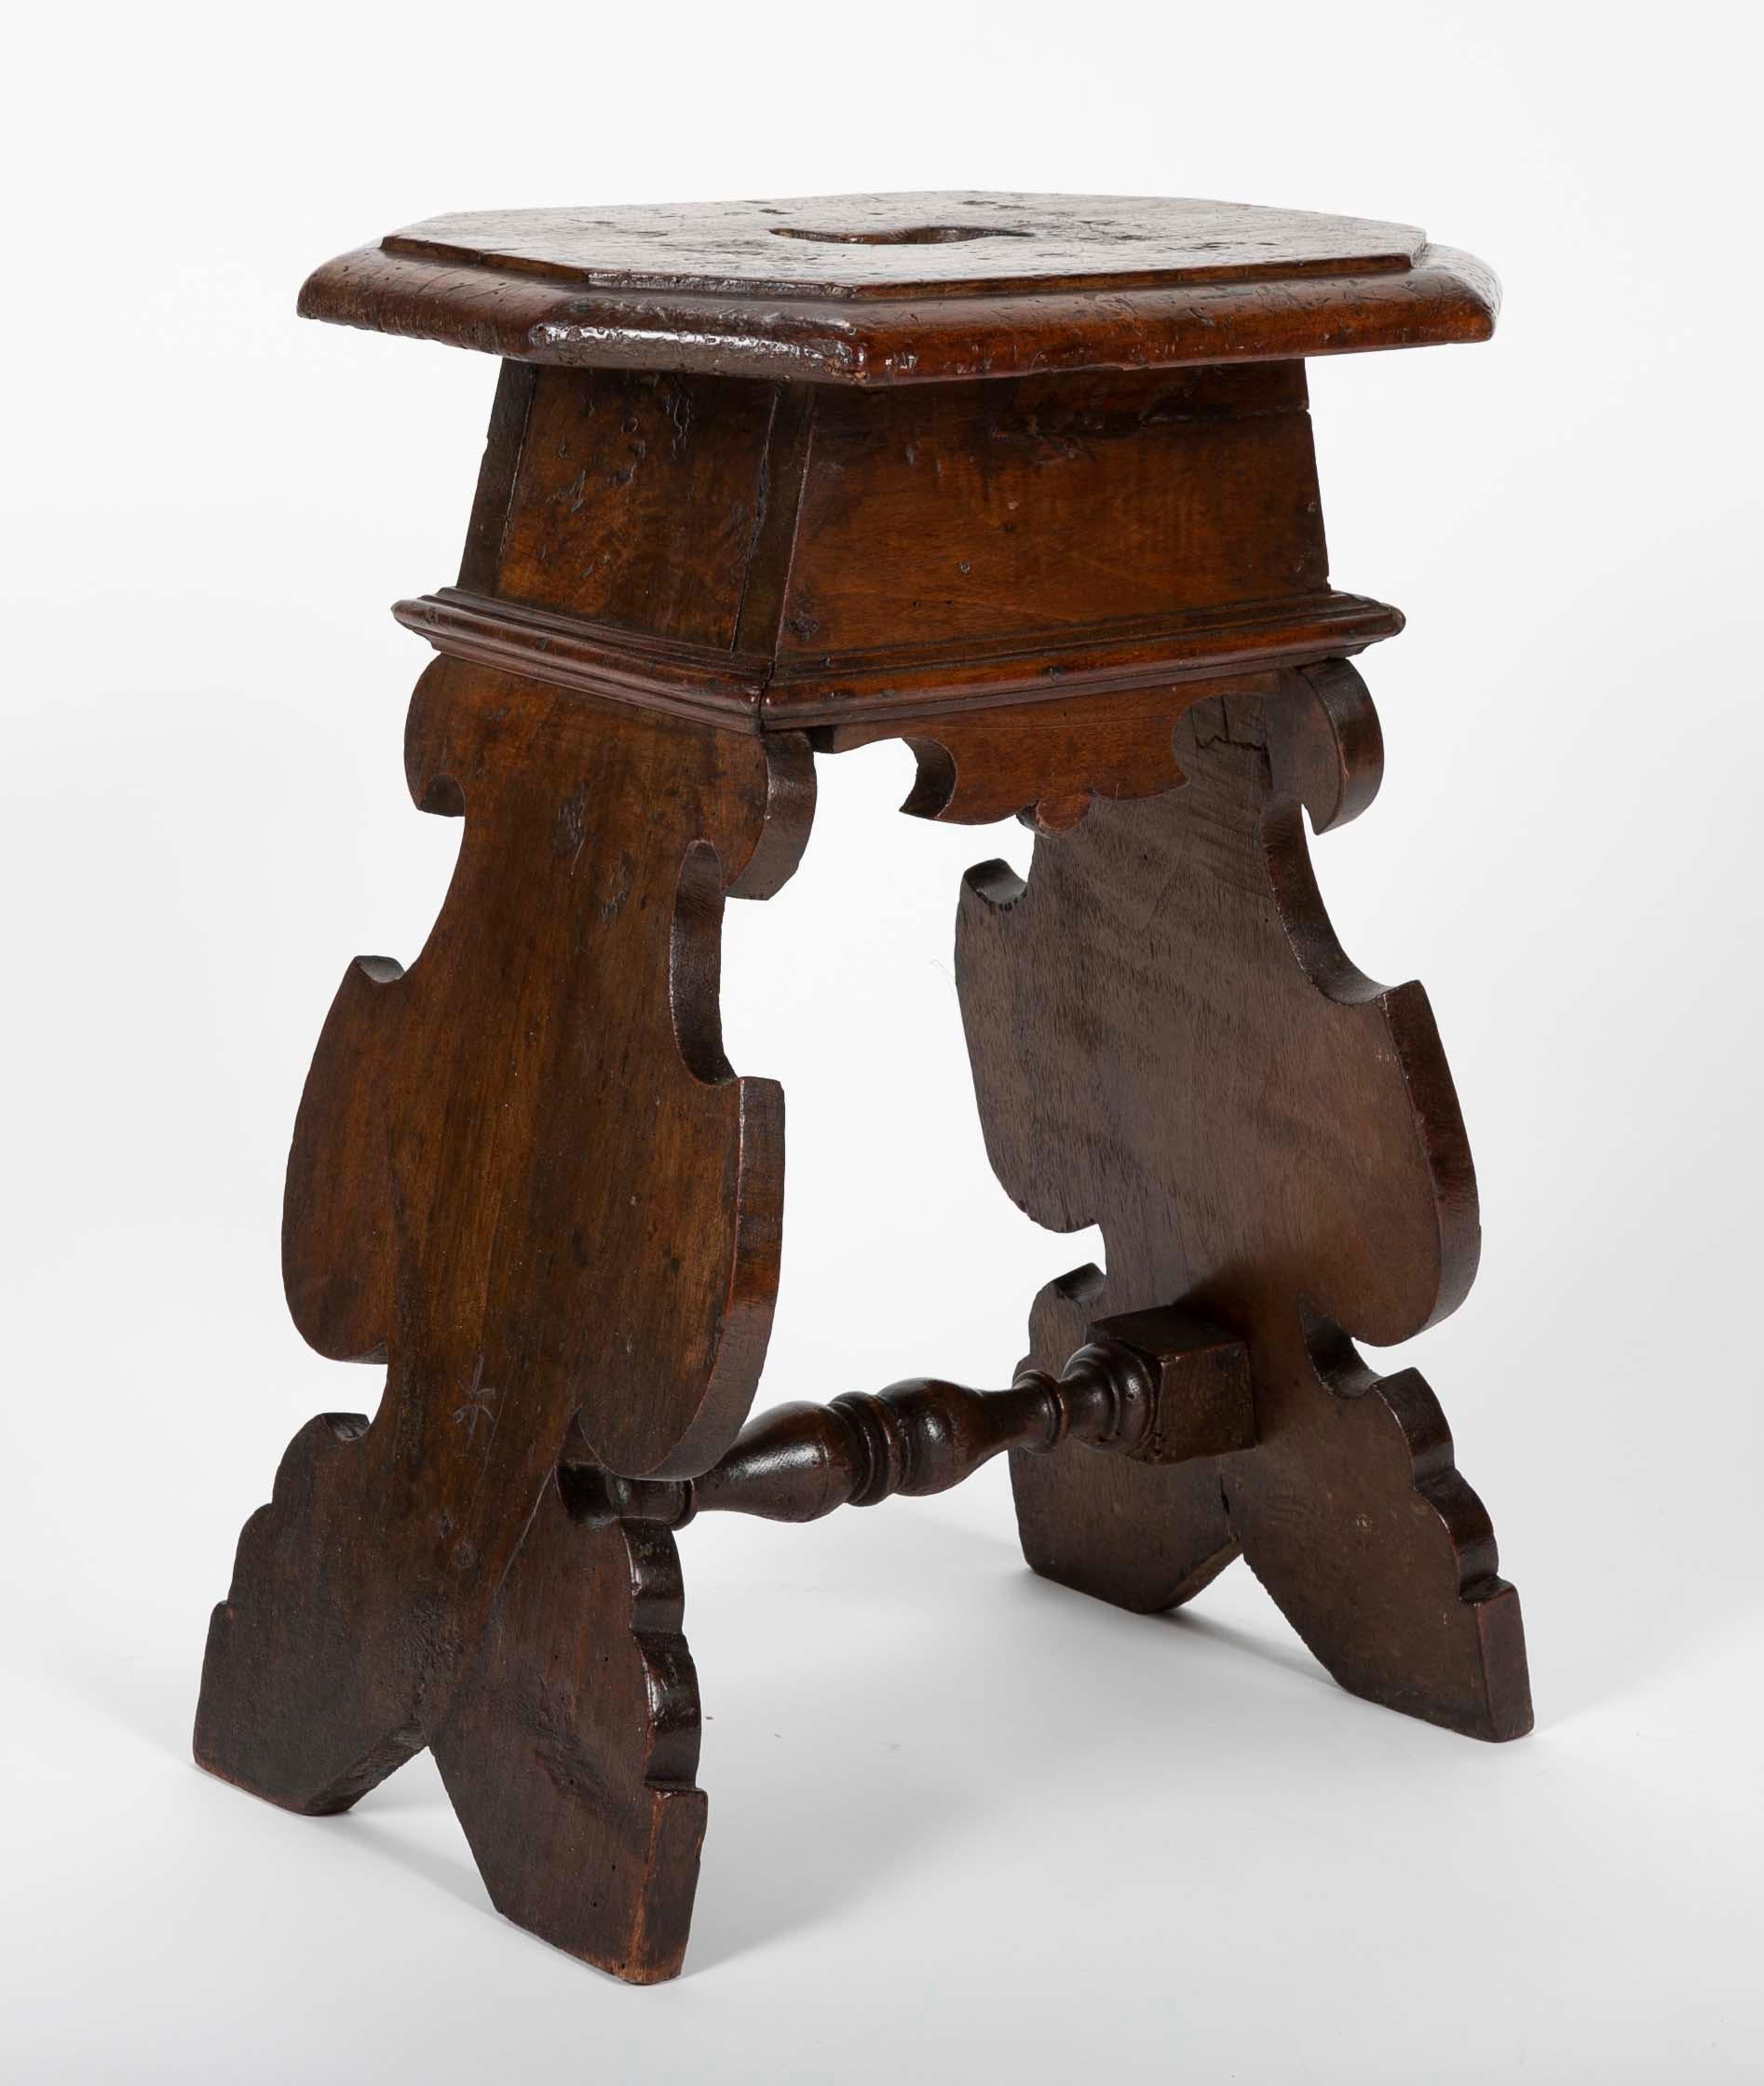 Rare all original late 16th or early 17th century Italian walnut stool. The sides showing signature Baroque profiles joined by a turned stretcher. The thick octagonal top with molded edge and center cut opening for easy lifting. A handsome form,